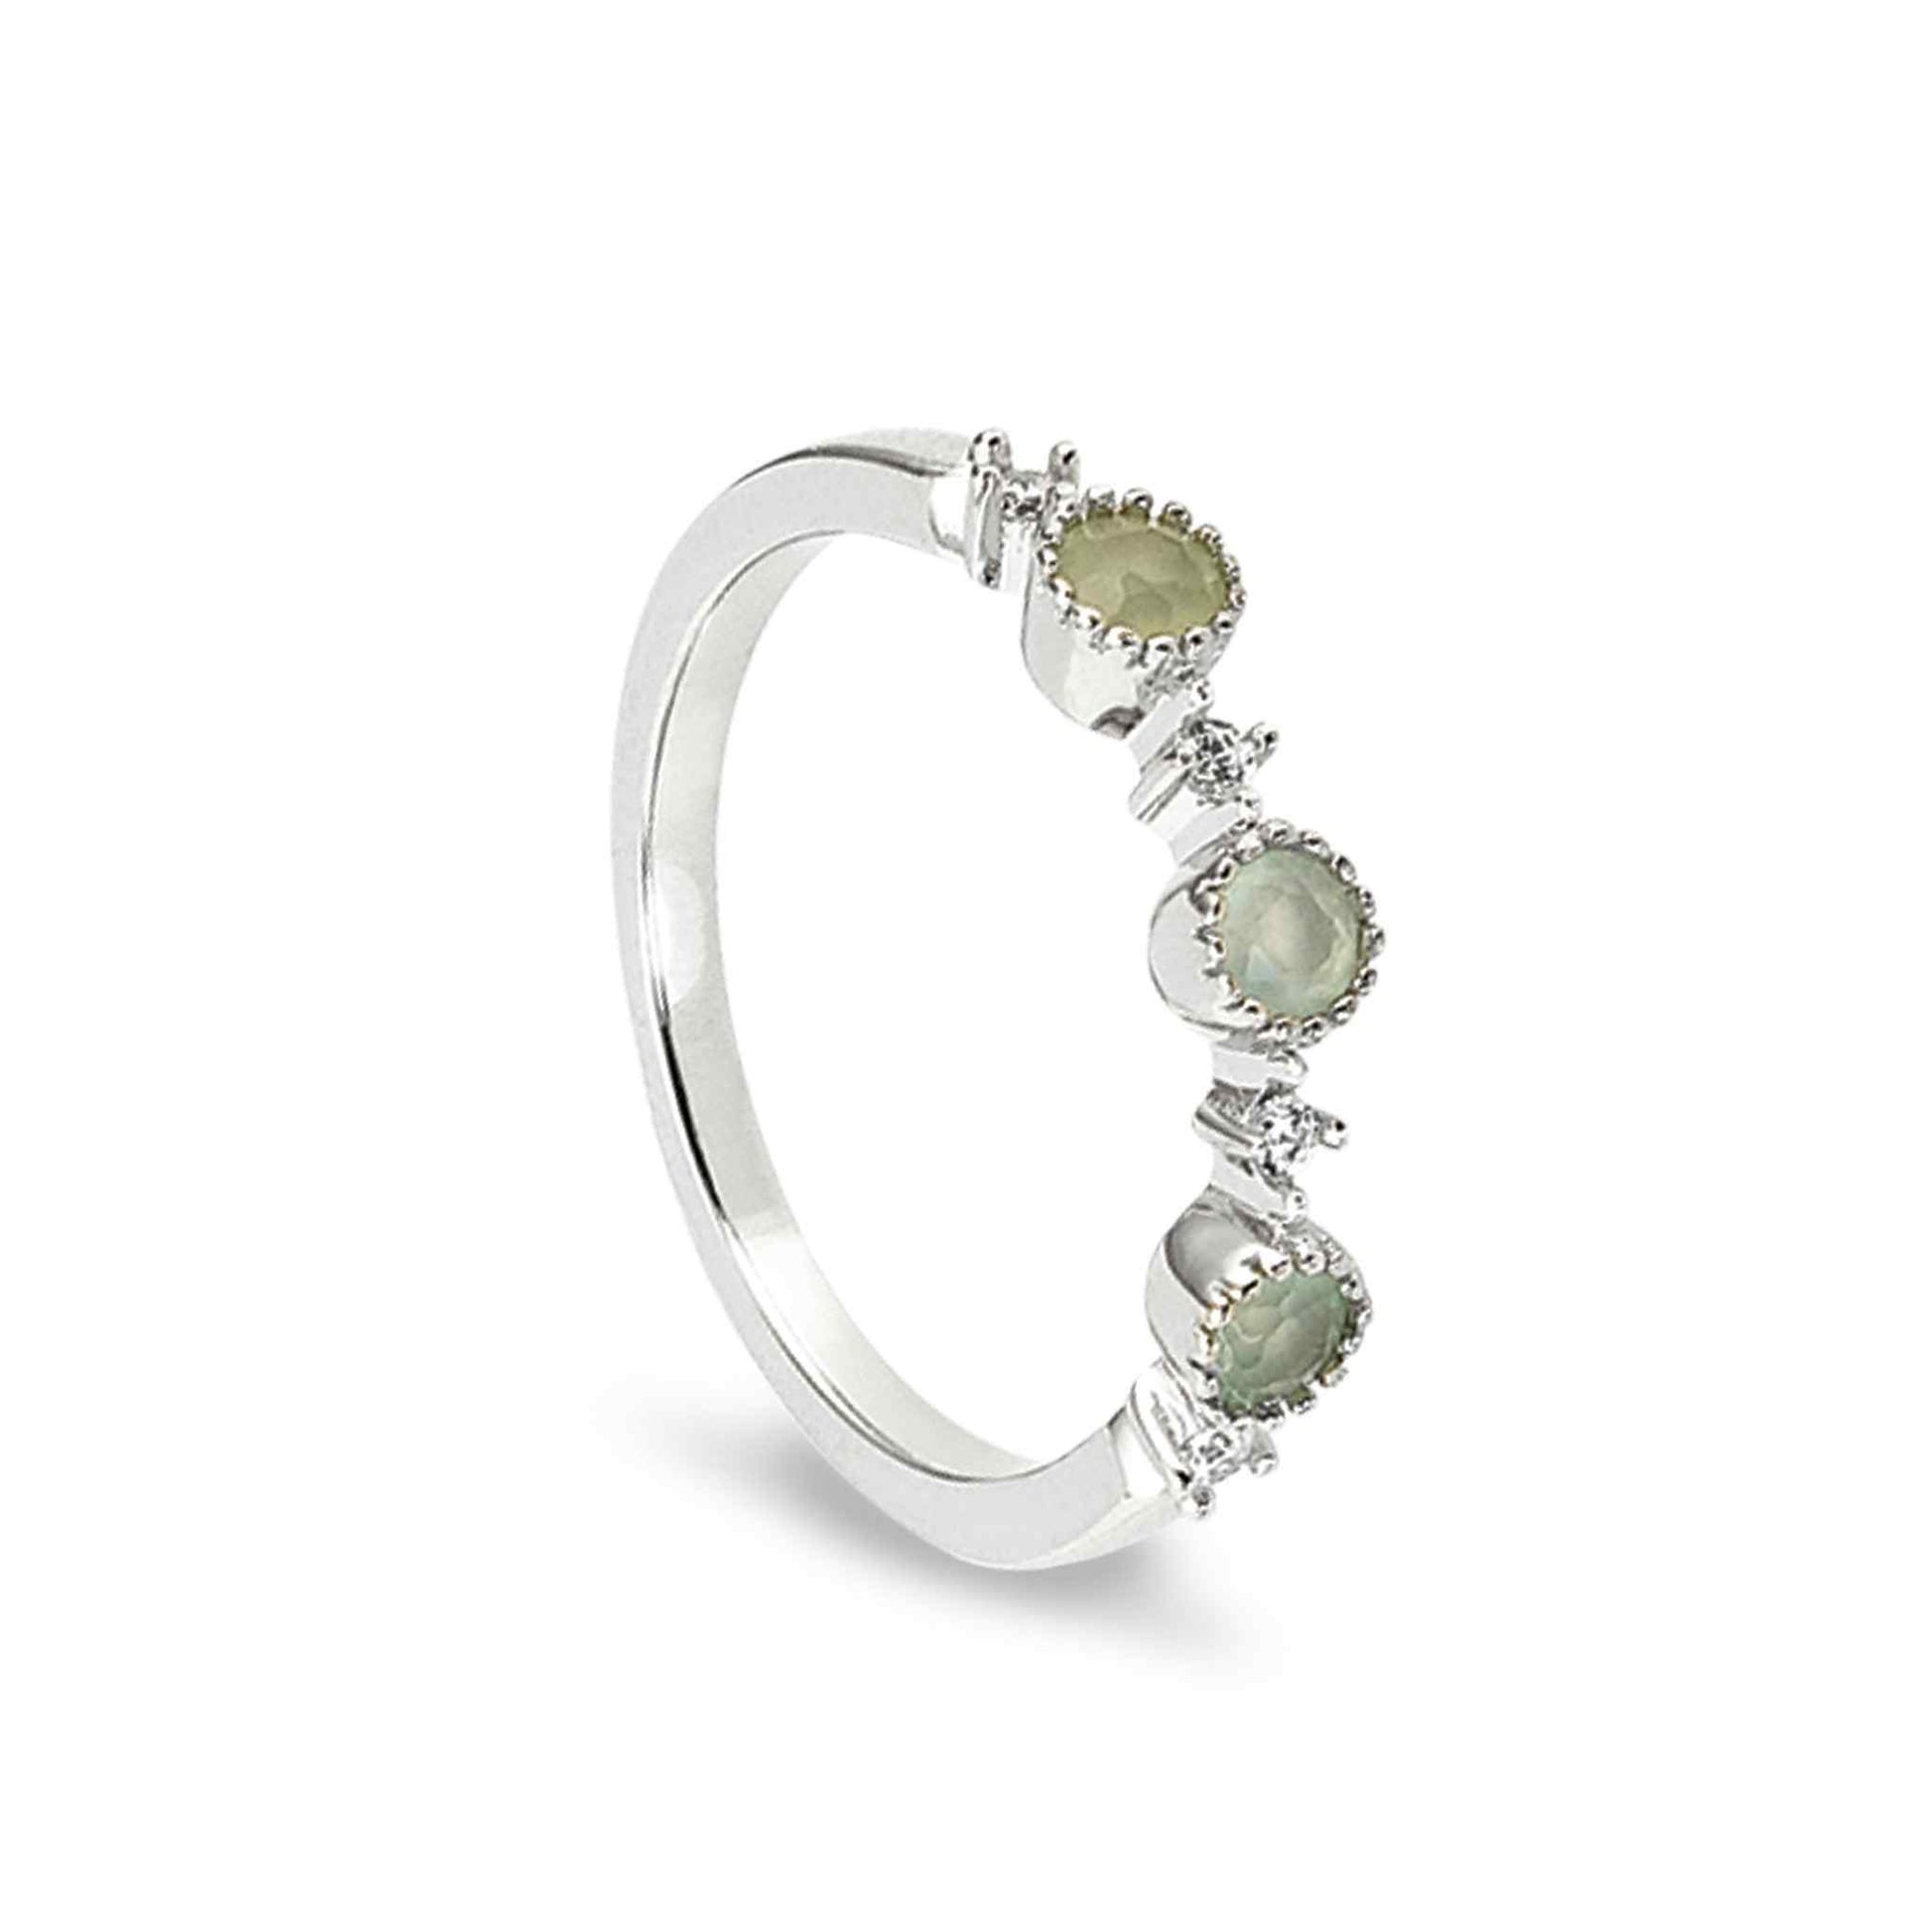 A green three stone ring with simulated diamonds displayed on a neutral white background.